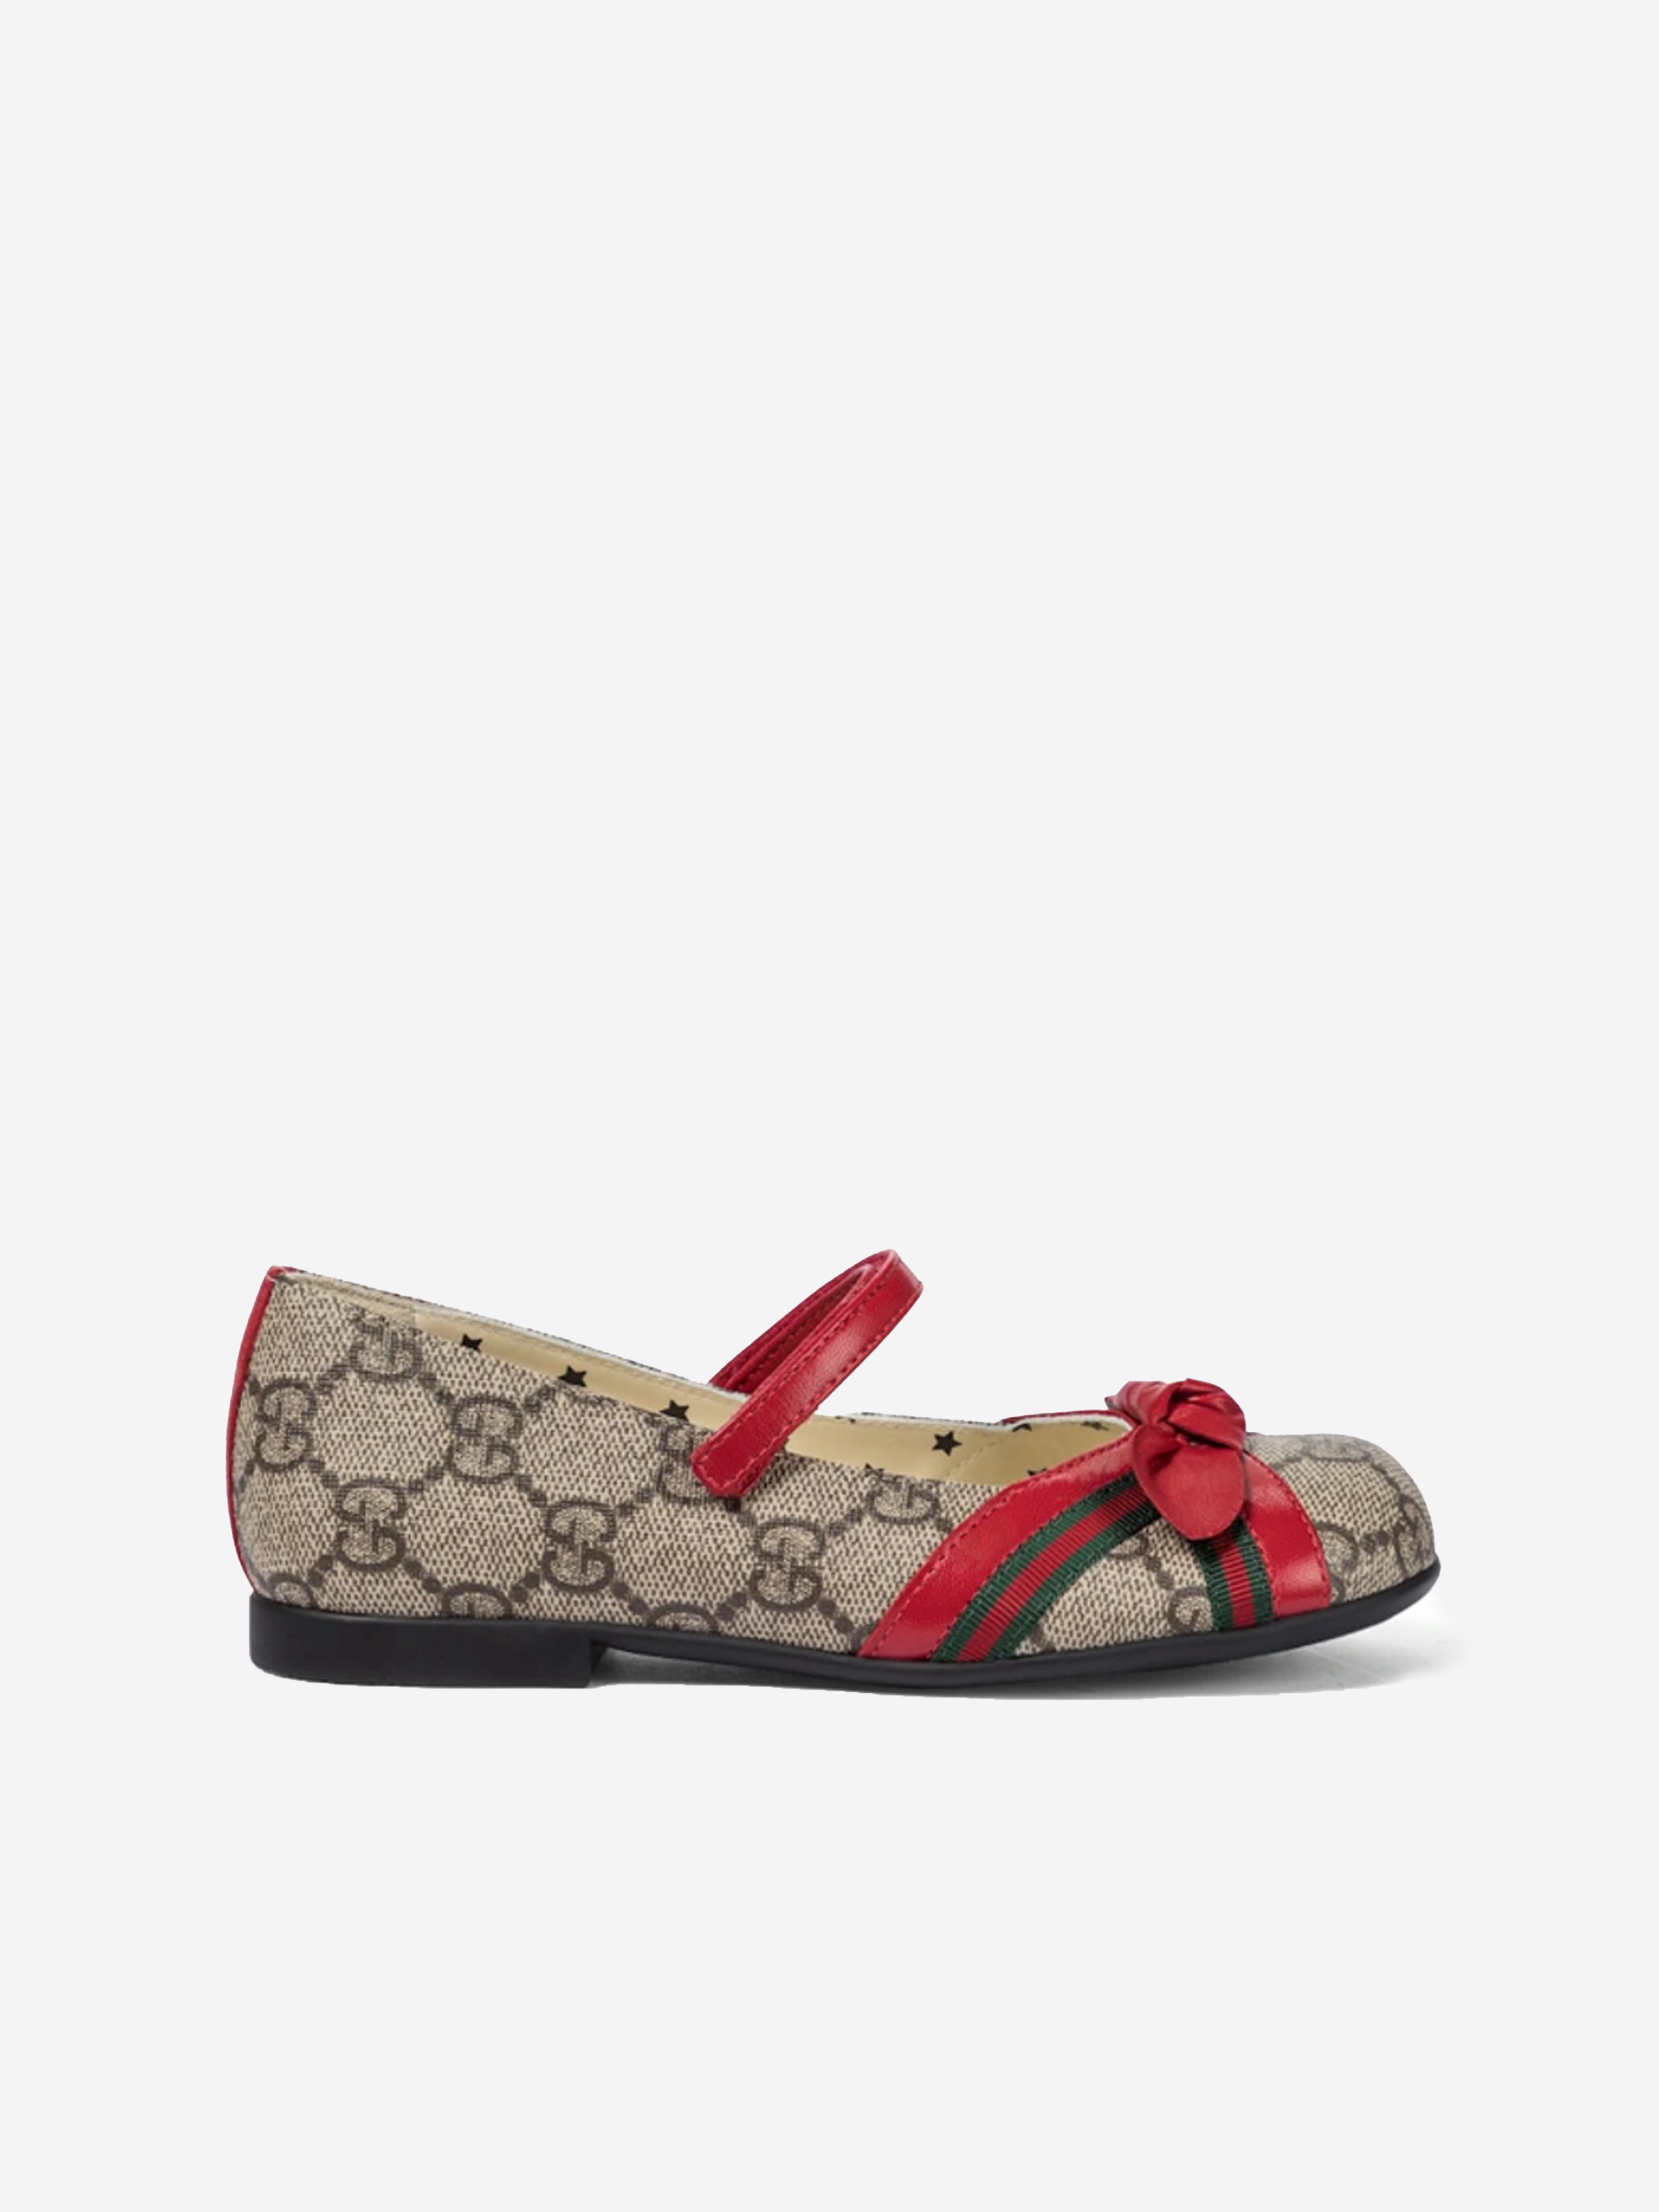 Gucci Shoes Girls Size 24 Used | eBay